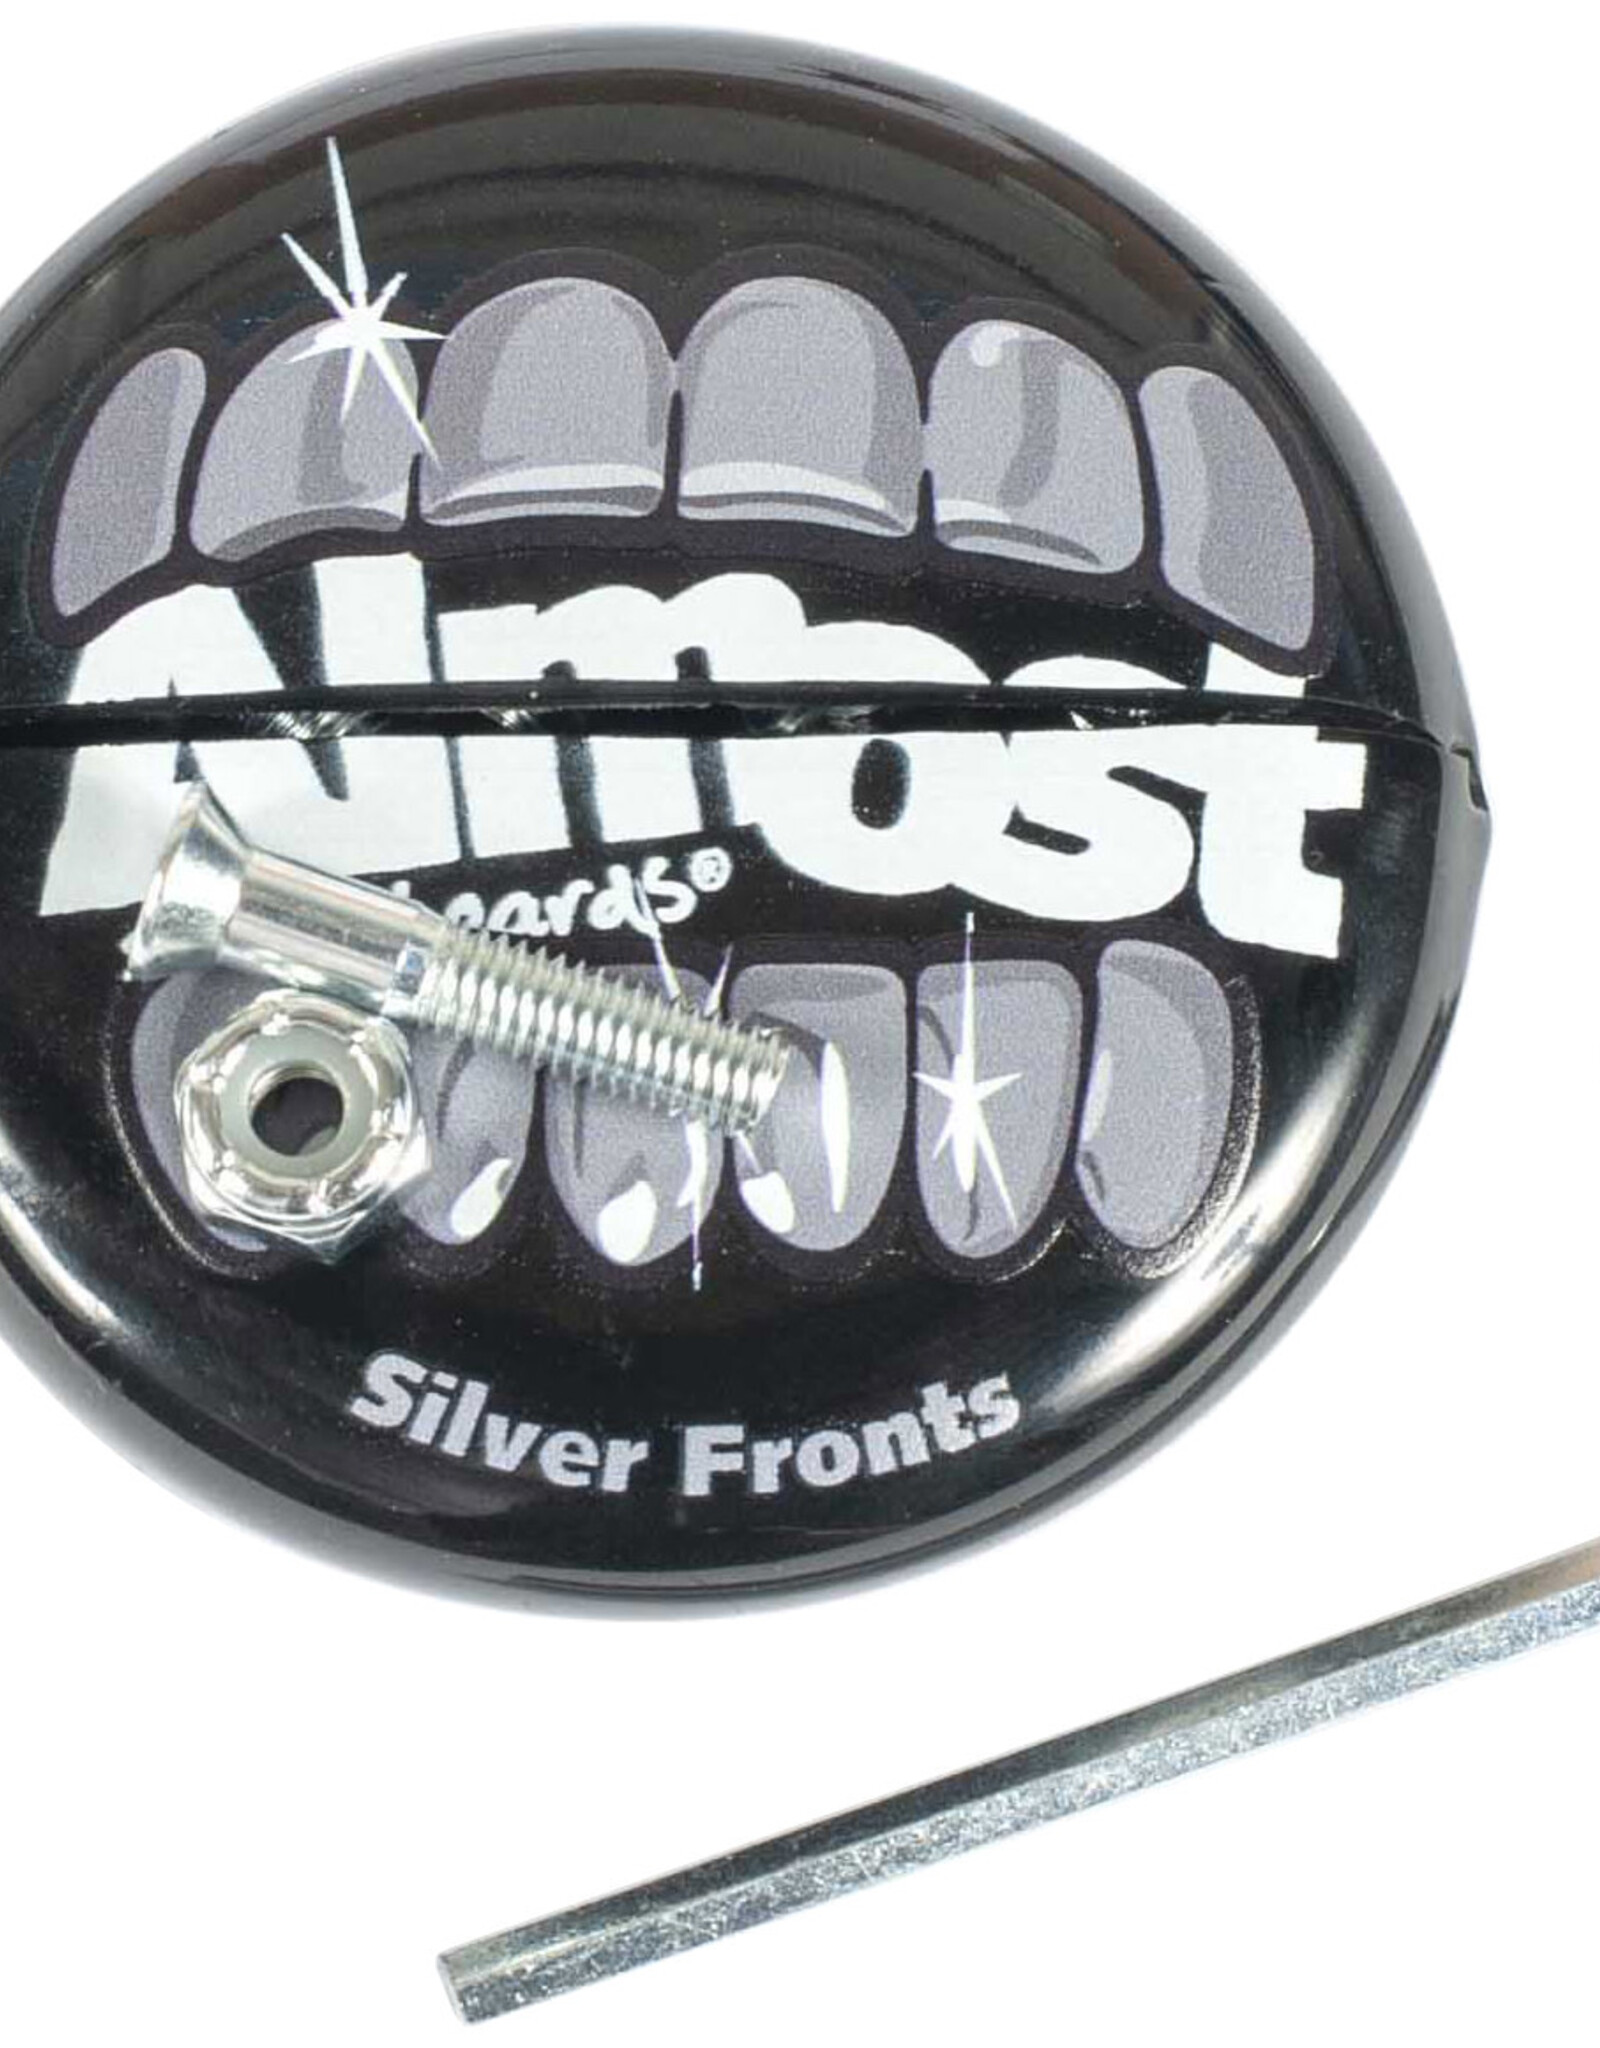 Almost Almost Hardware - Silver fronts 1"